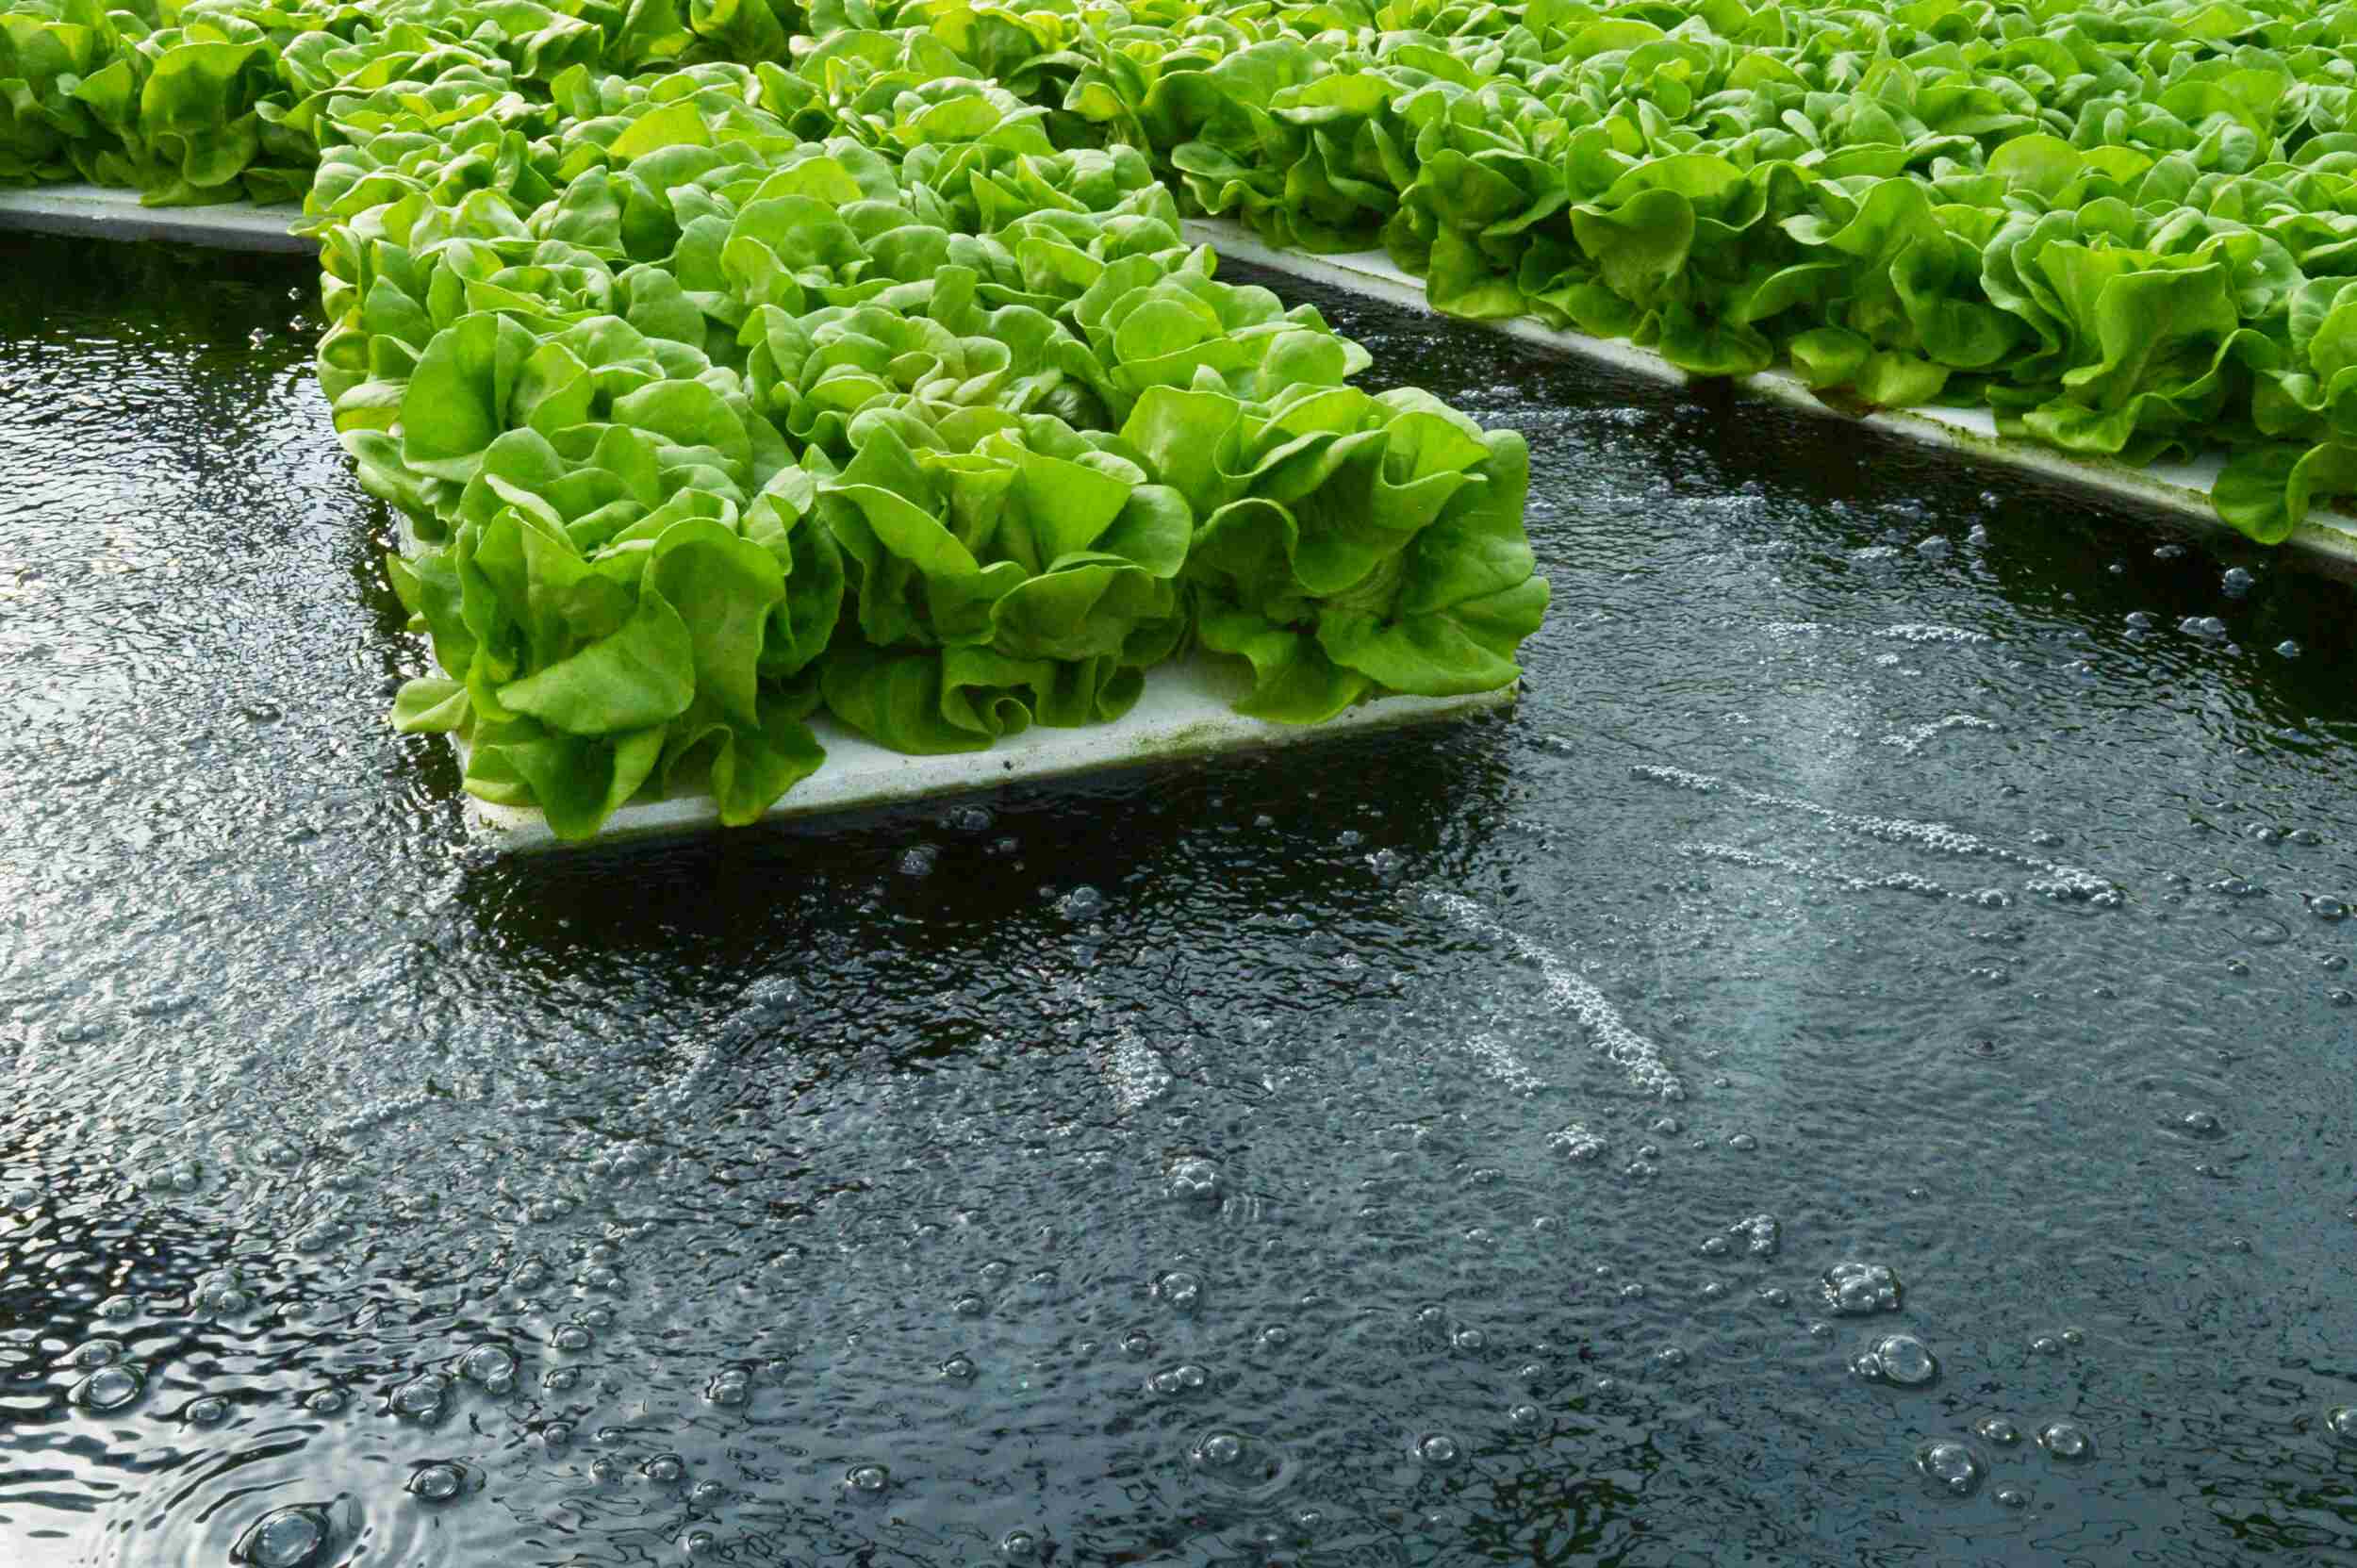 What Are Some Advantages Of Hydroponics